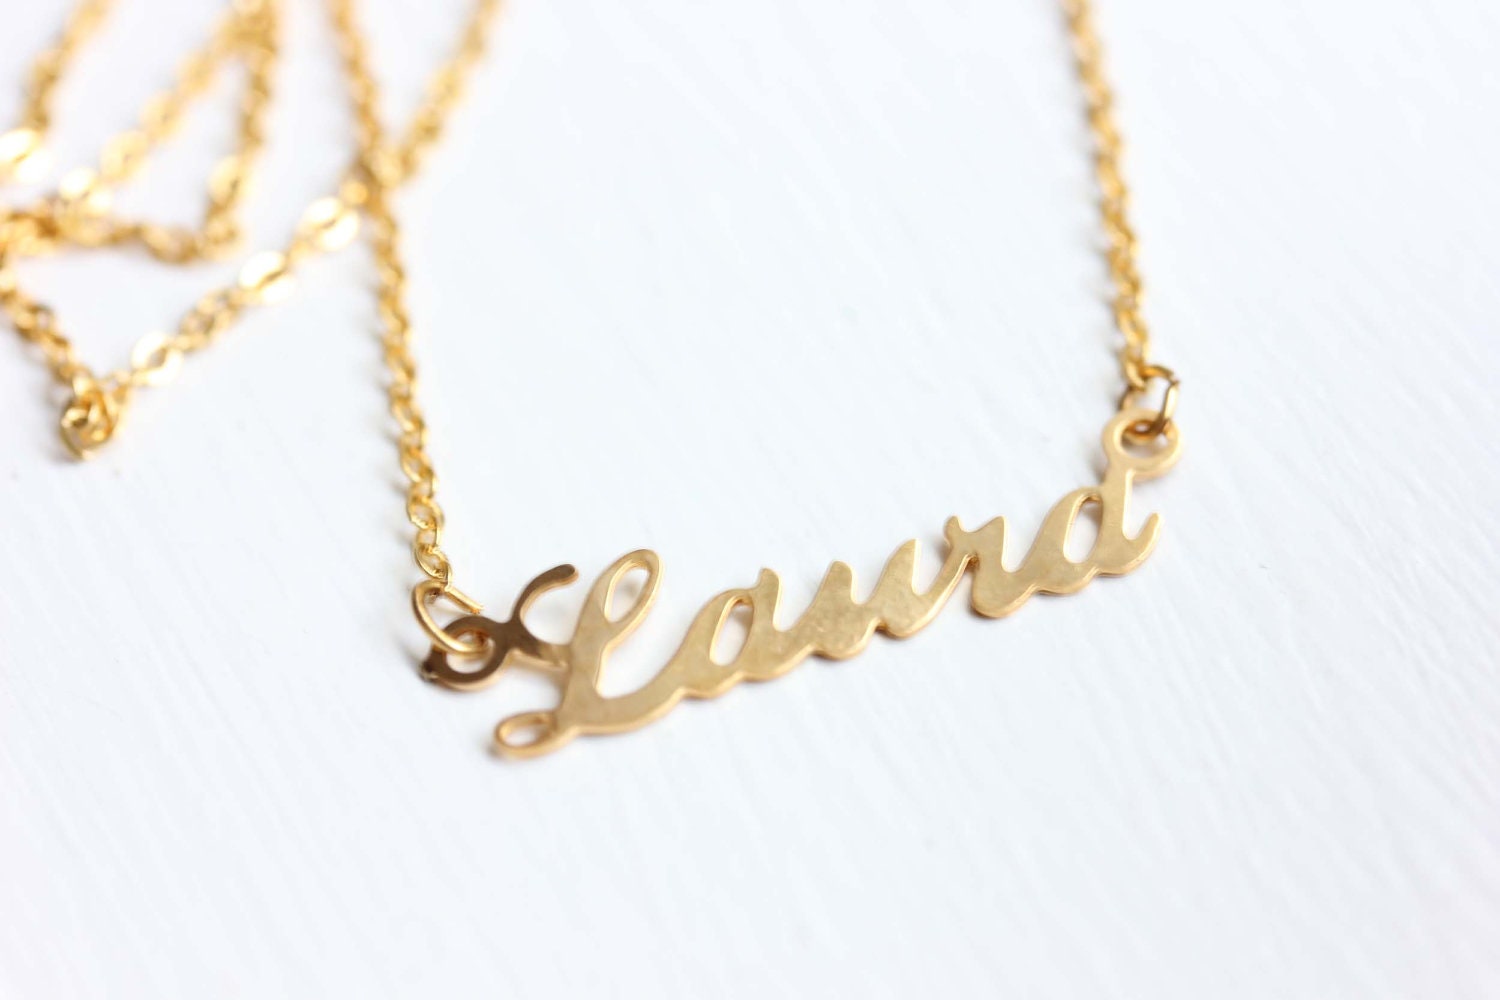  Laura  Name  Necklace Laura  Name  Jewelry  Name  Necklace Gold 